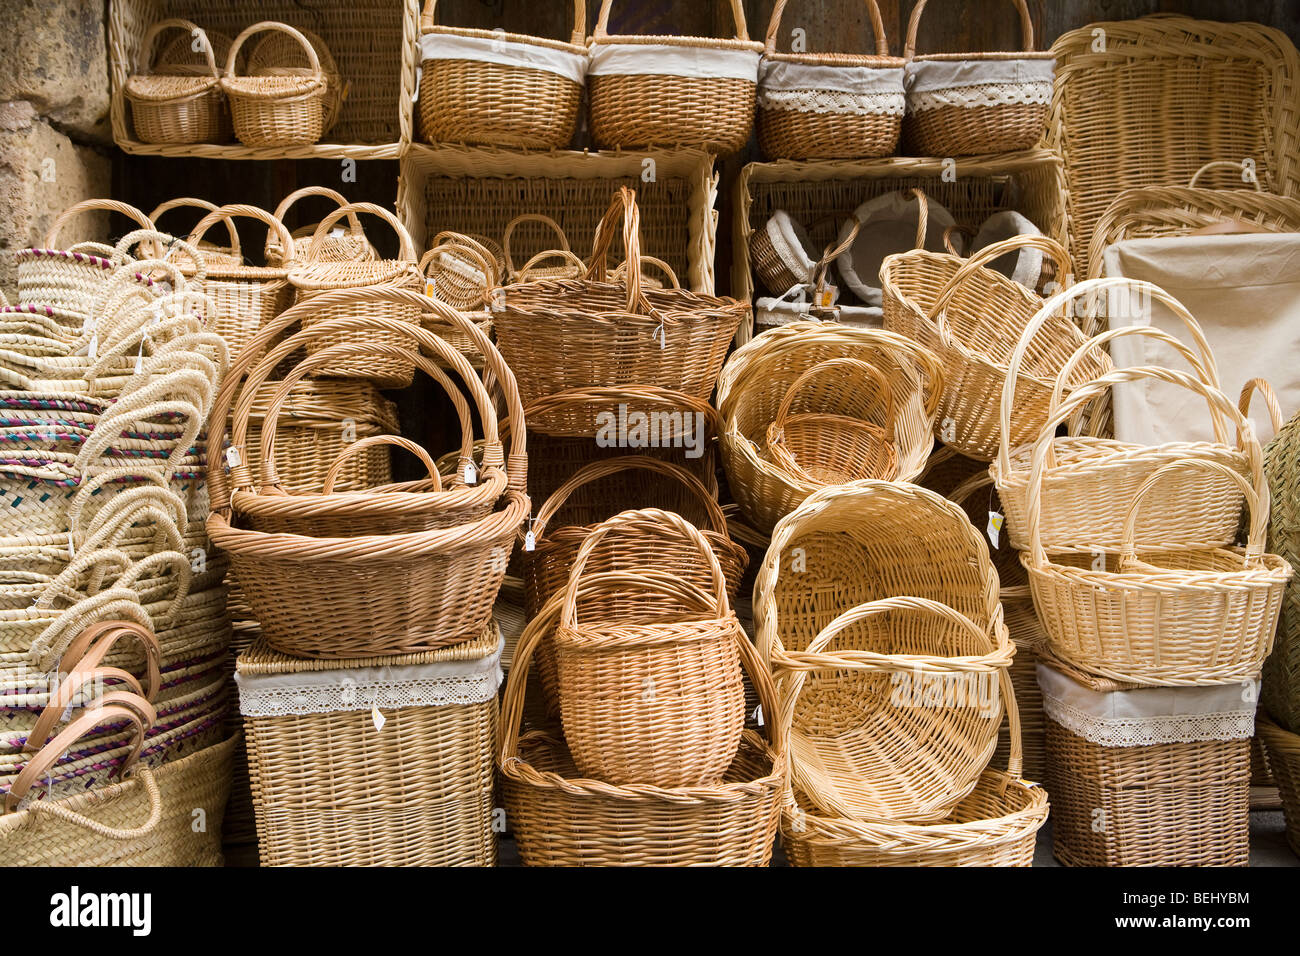 Stacked variety of traditional wickerwork baskets outside shop, Segovia, Spain Stock Photo